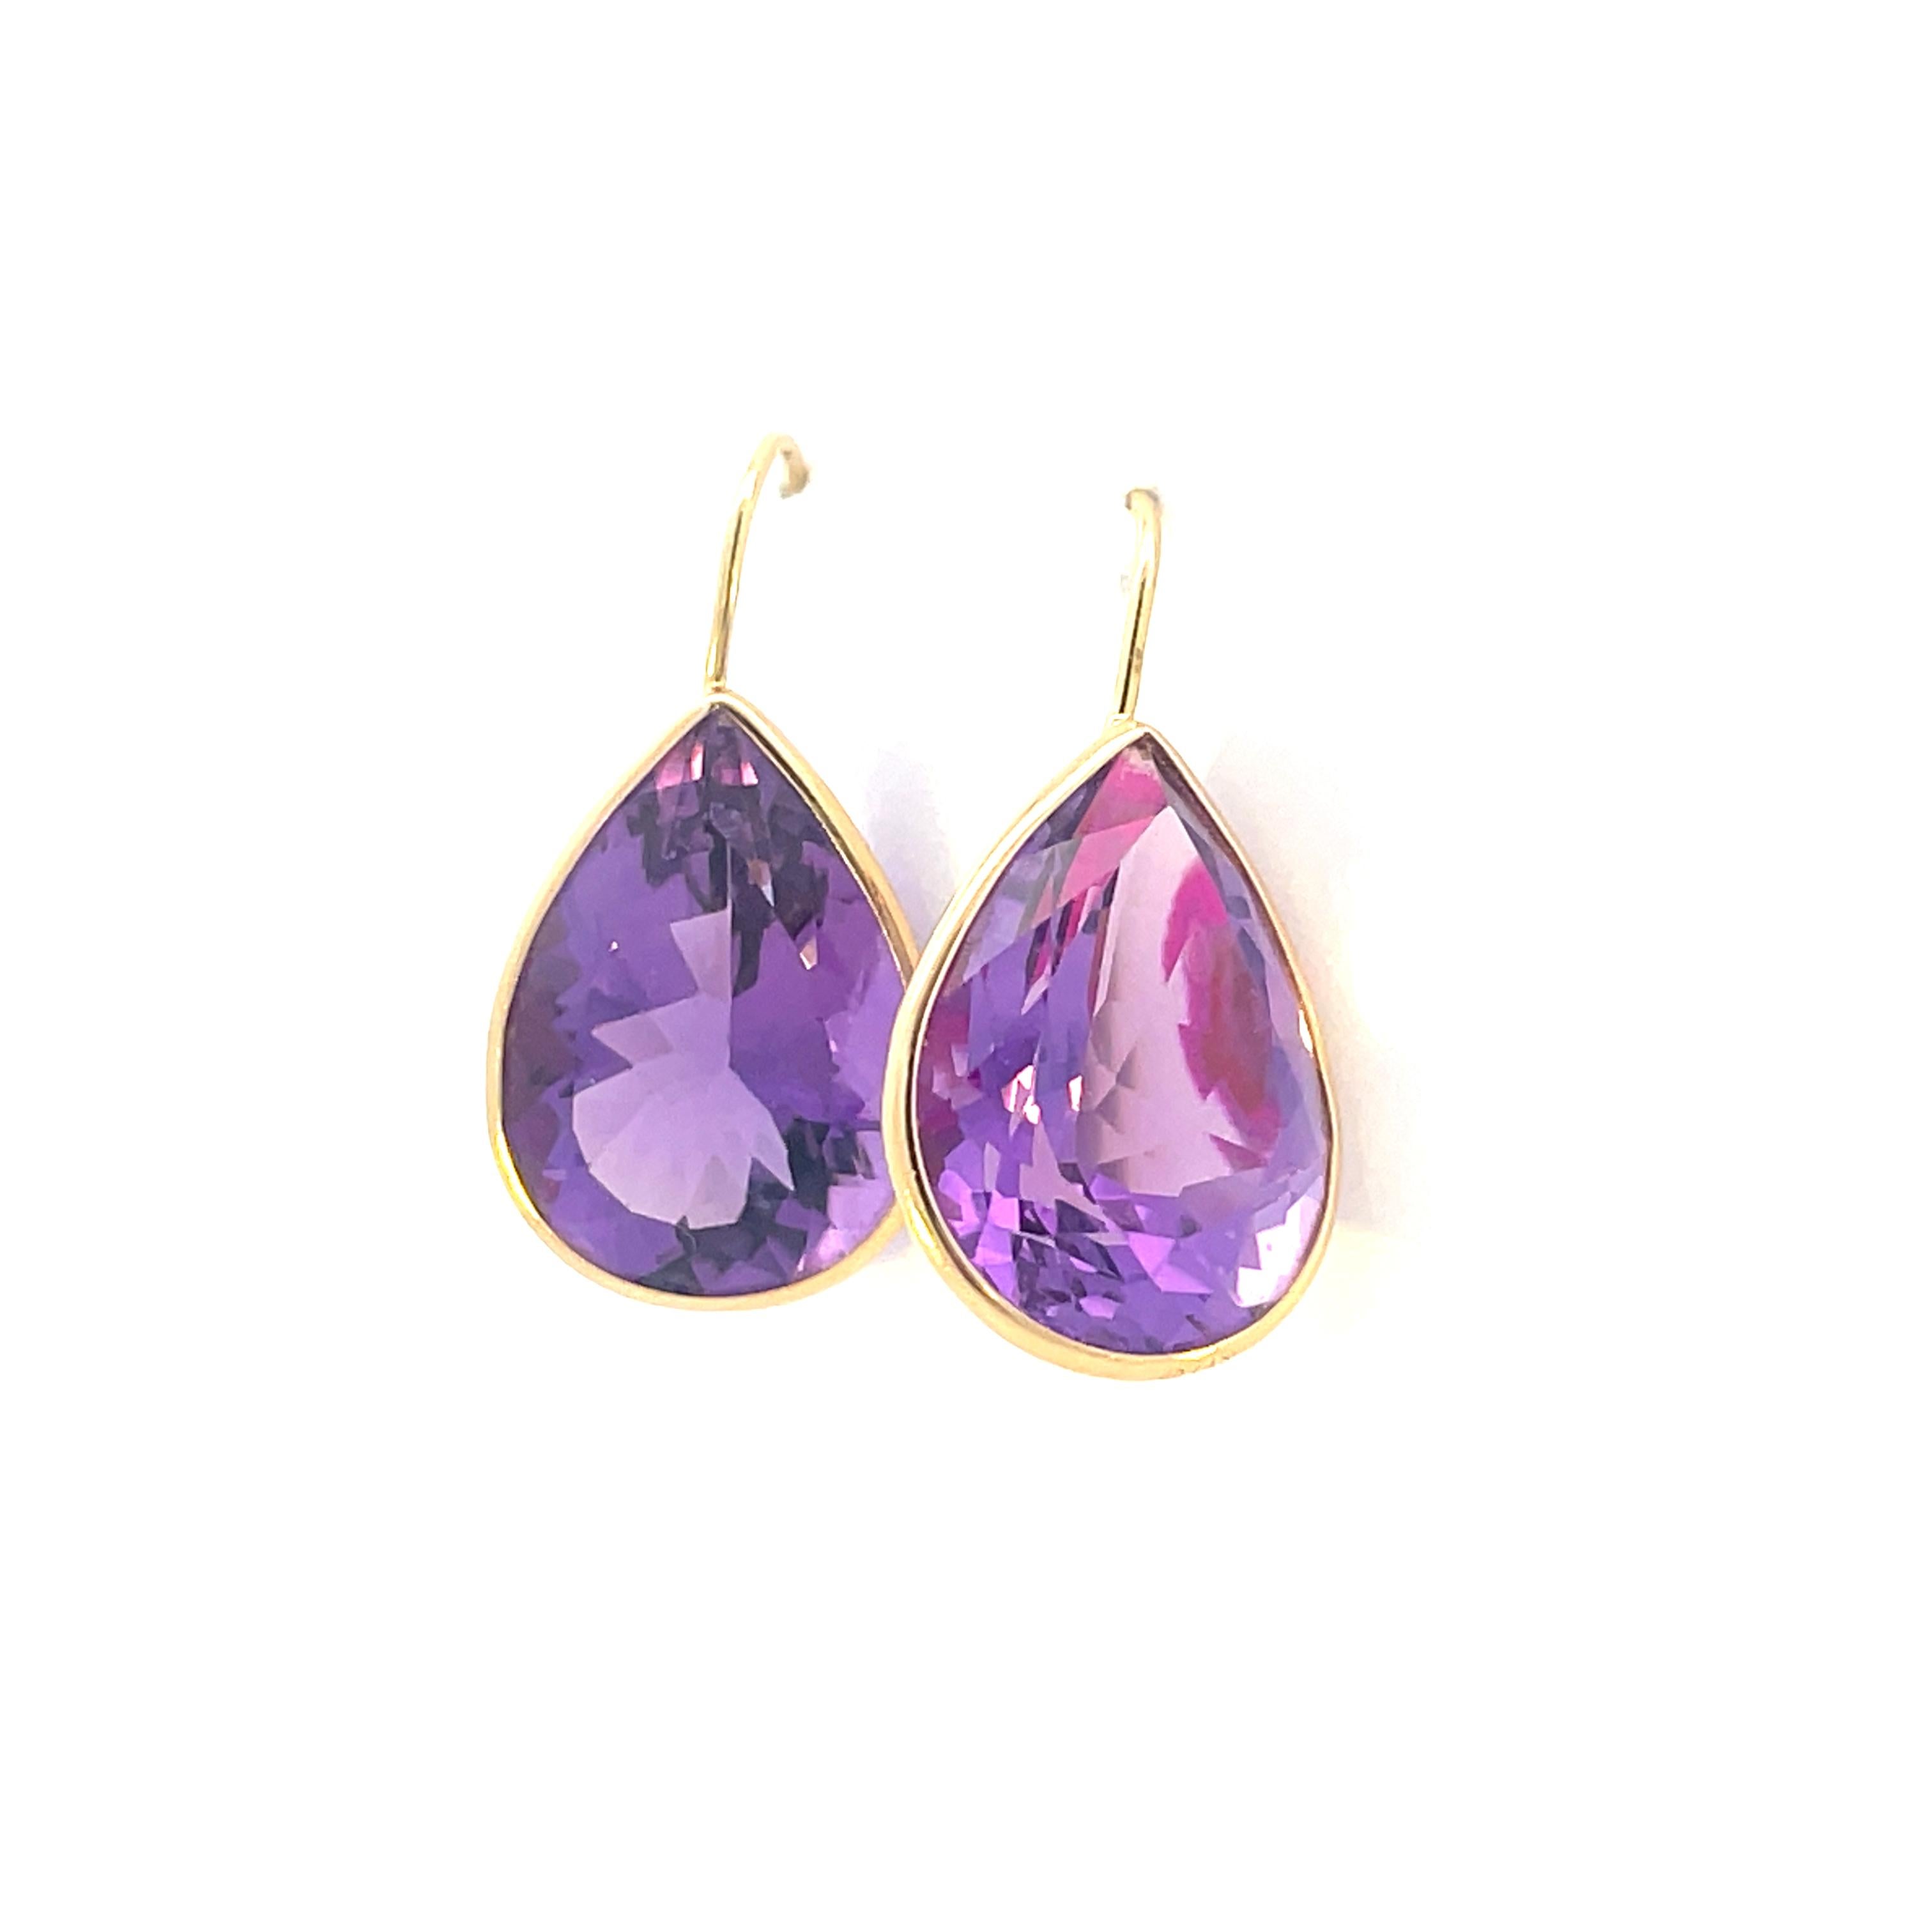 This stunning pair of 14k yellow gold earrings feature an almost invisible channel set purple teardrop shaped amethyst, each with an approximate carat weight of 10. The light lavender with subtle red finishes in the amethyst combined with the